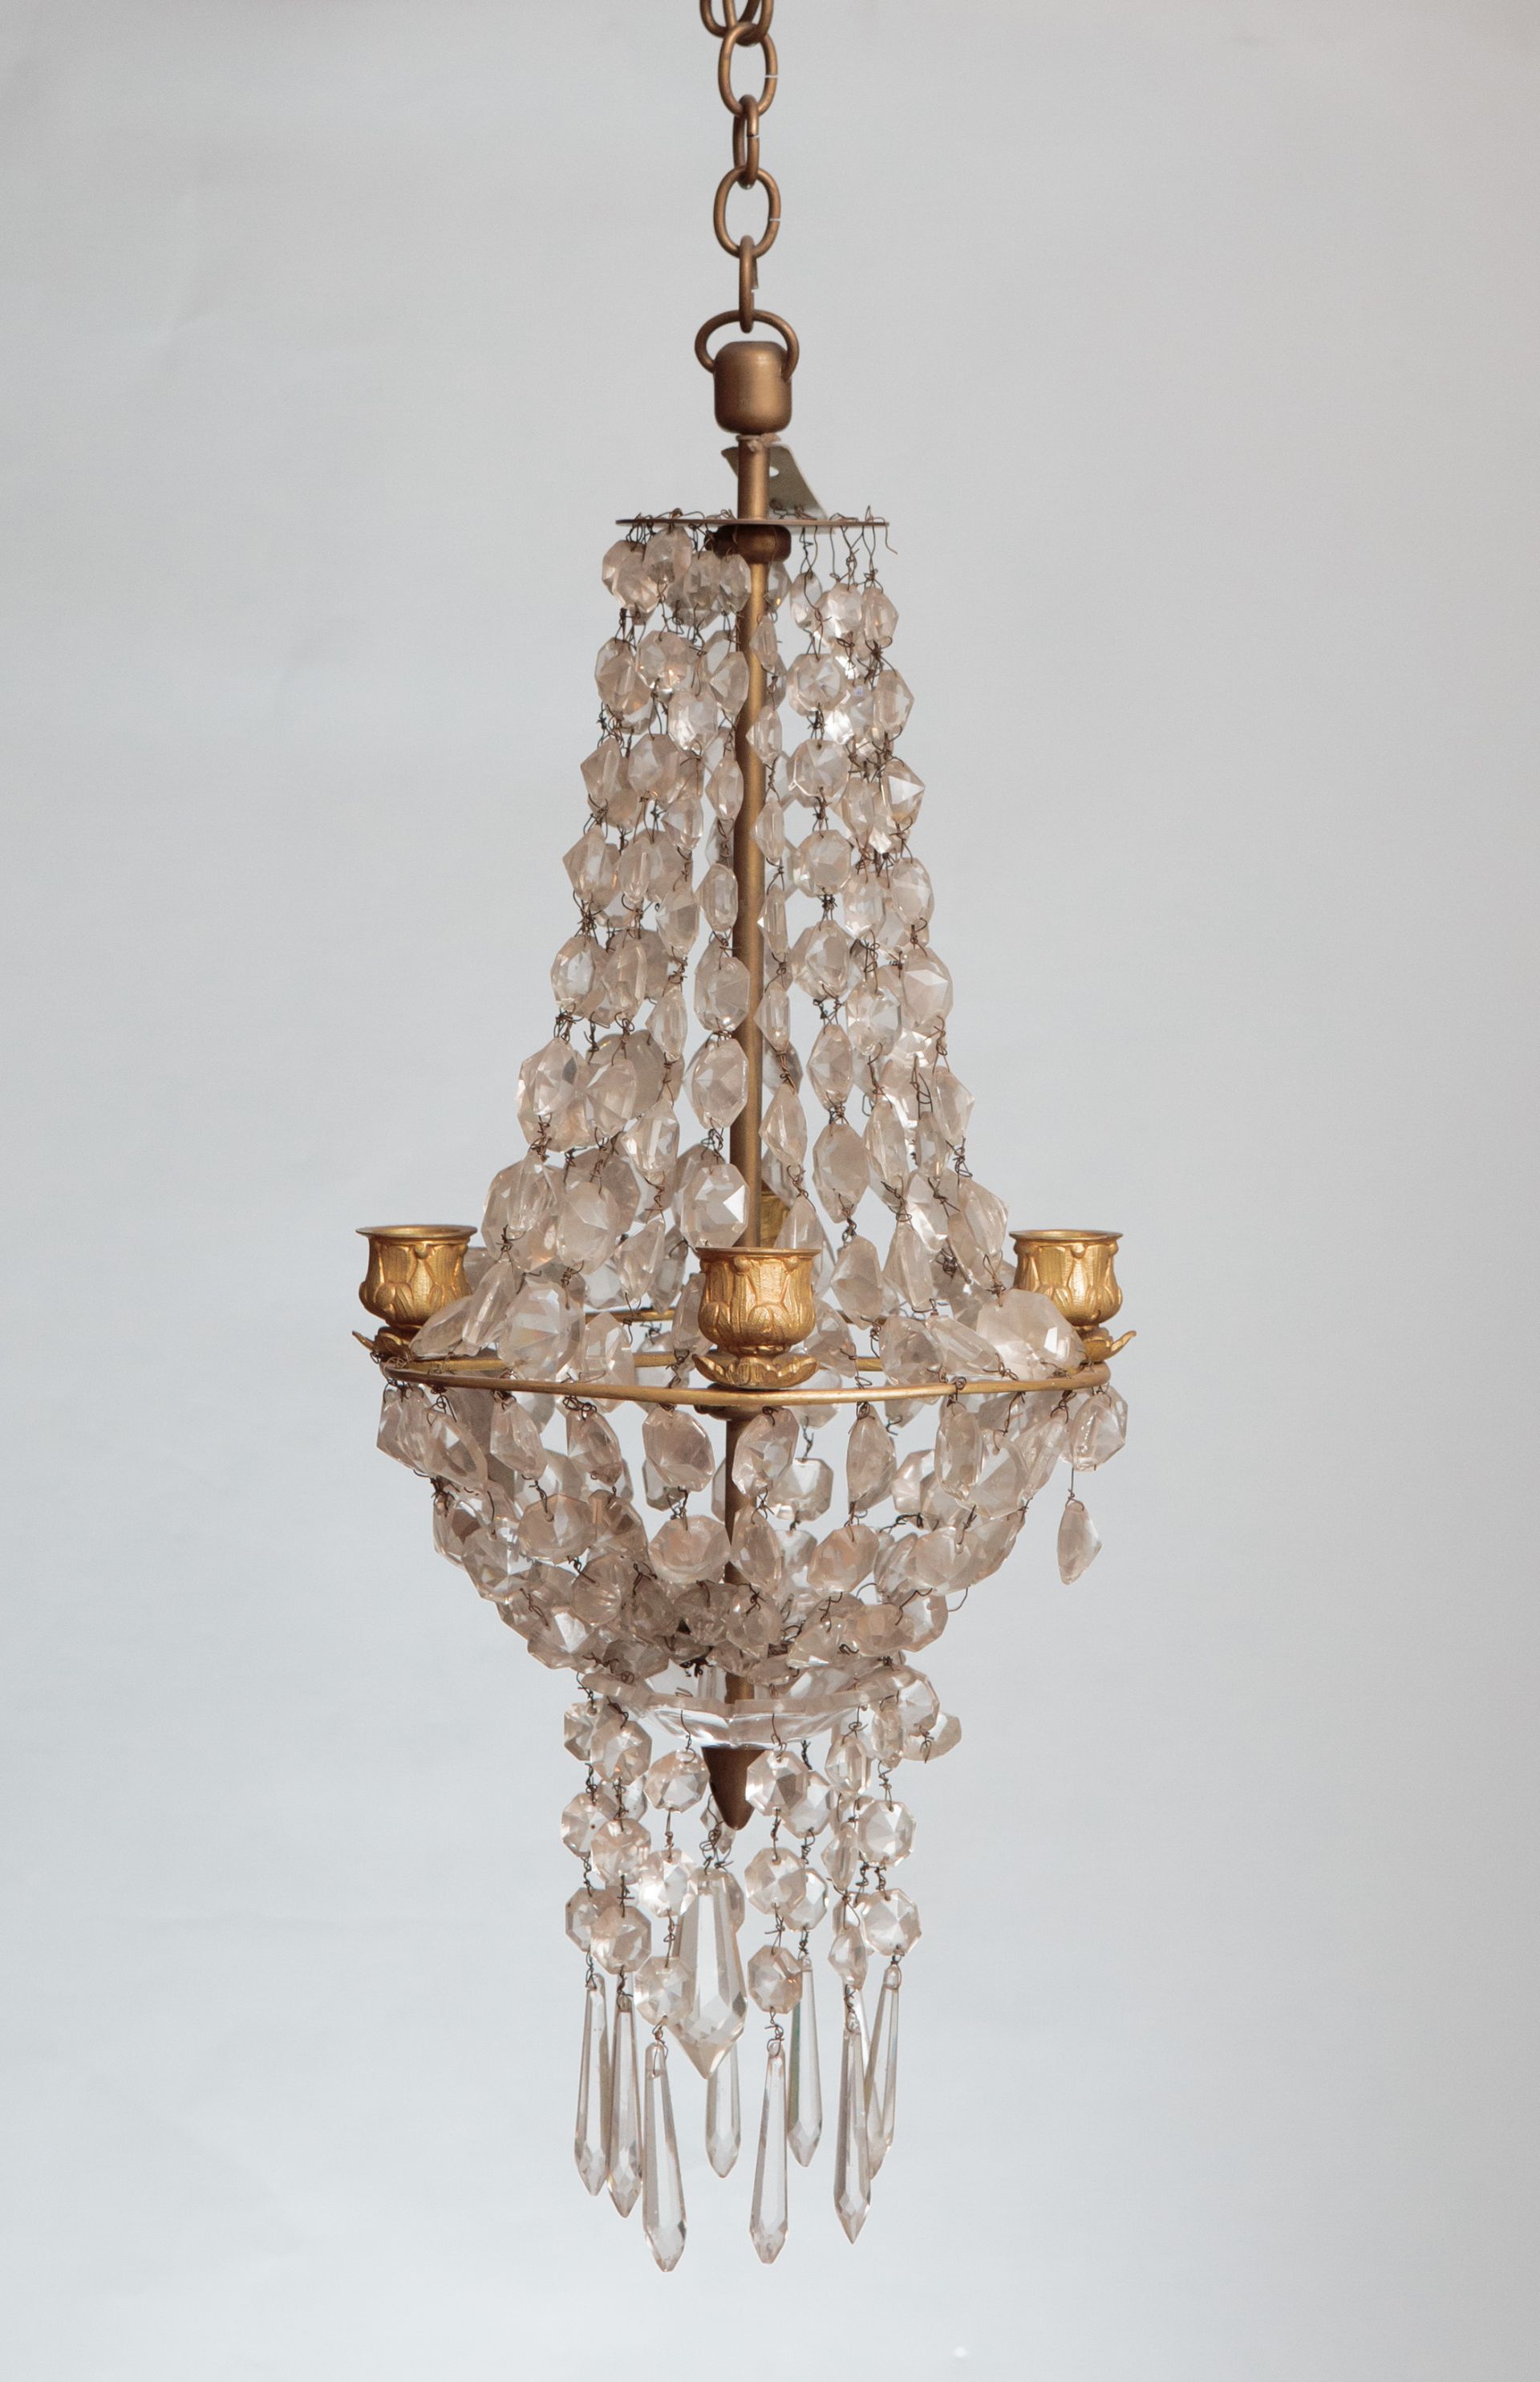 Chandelier, 1887–1911, Lithuanian National Museum of Art, TM-455. Photo by Tomas Kapočius, 2017